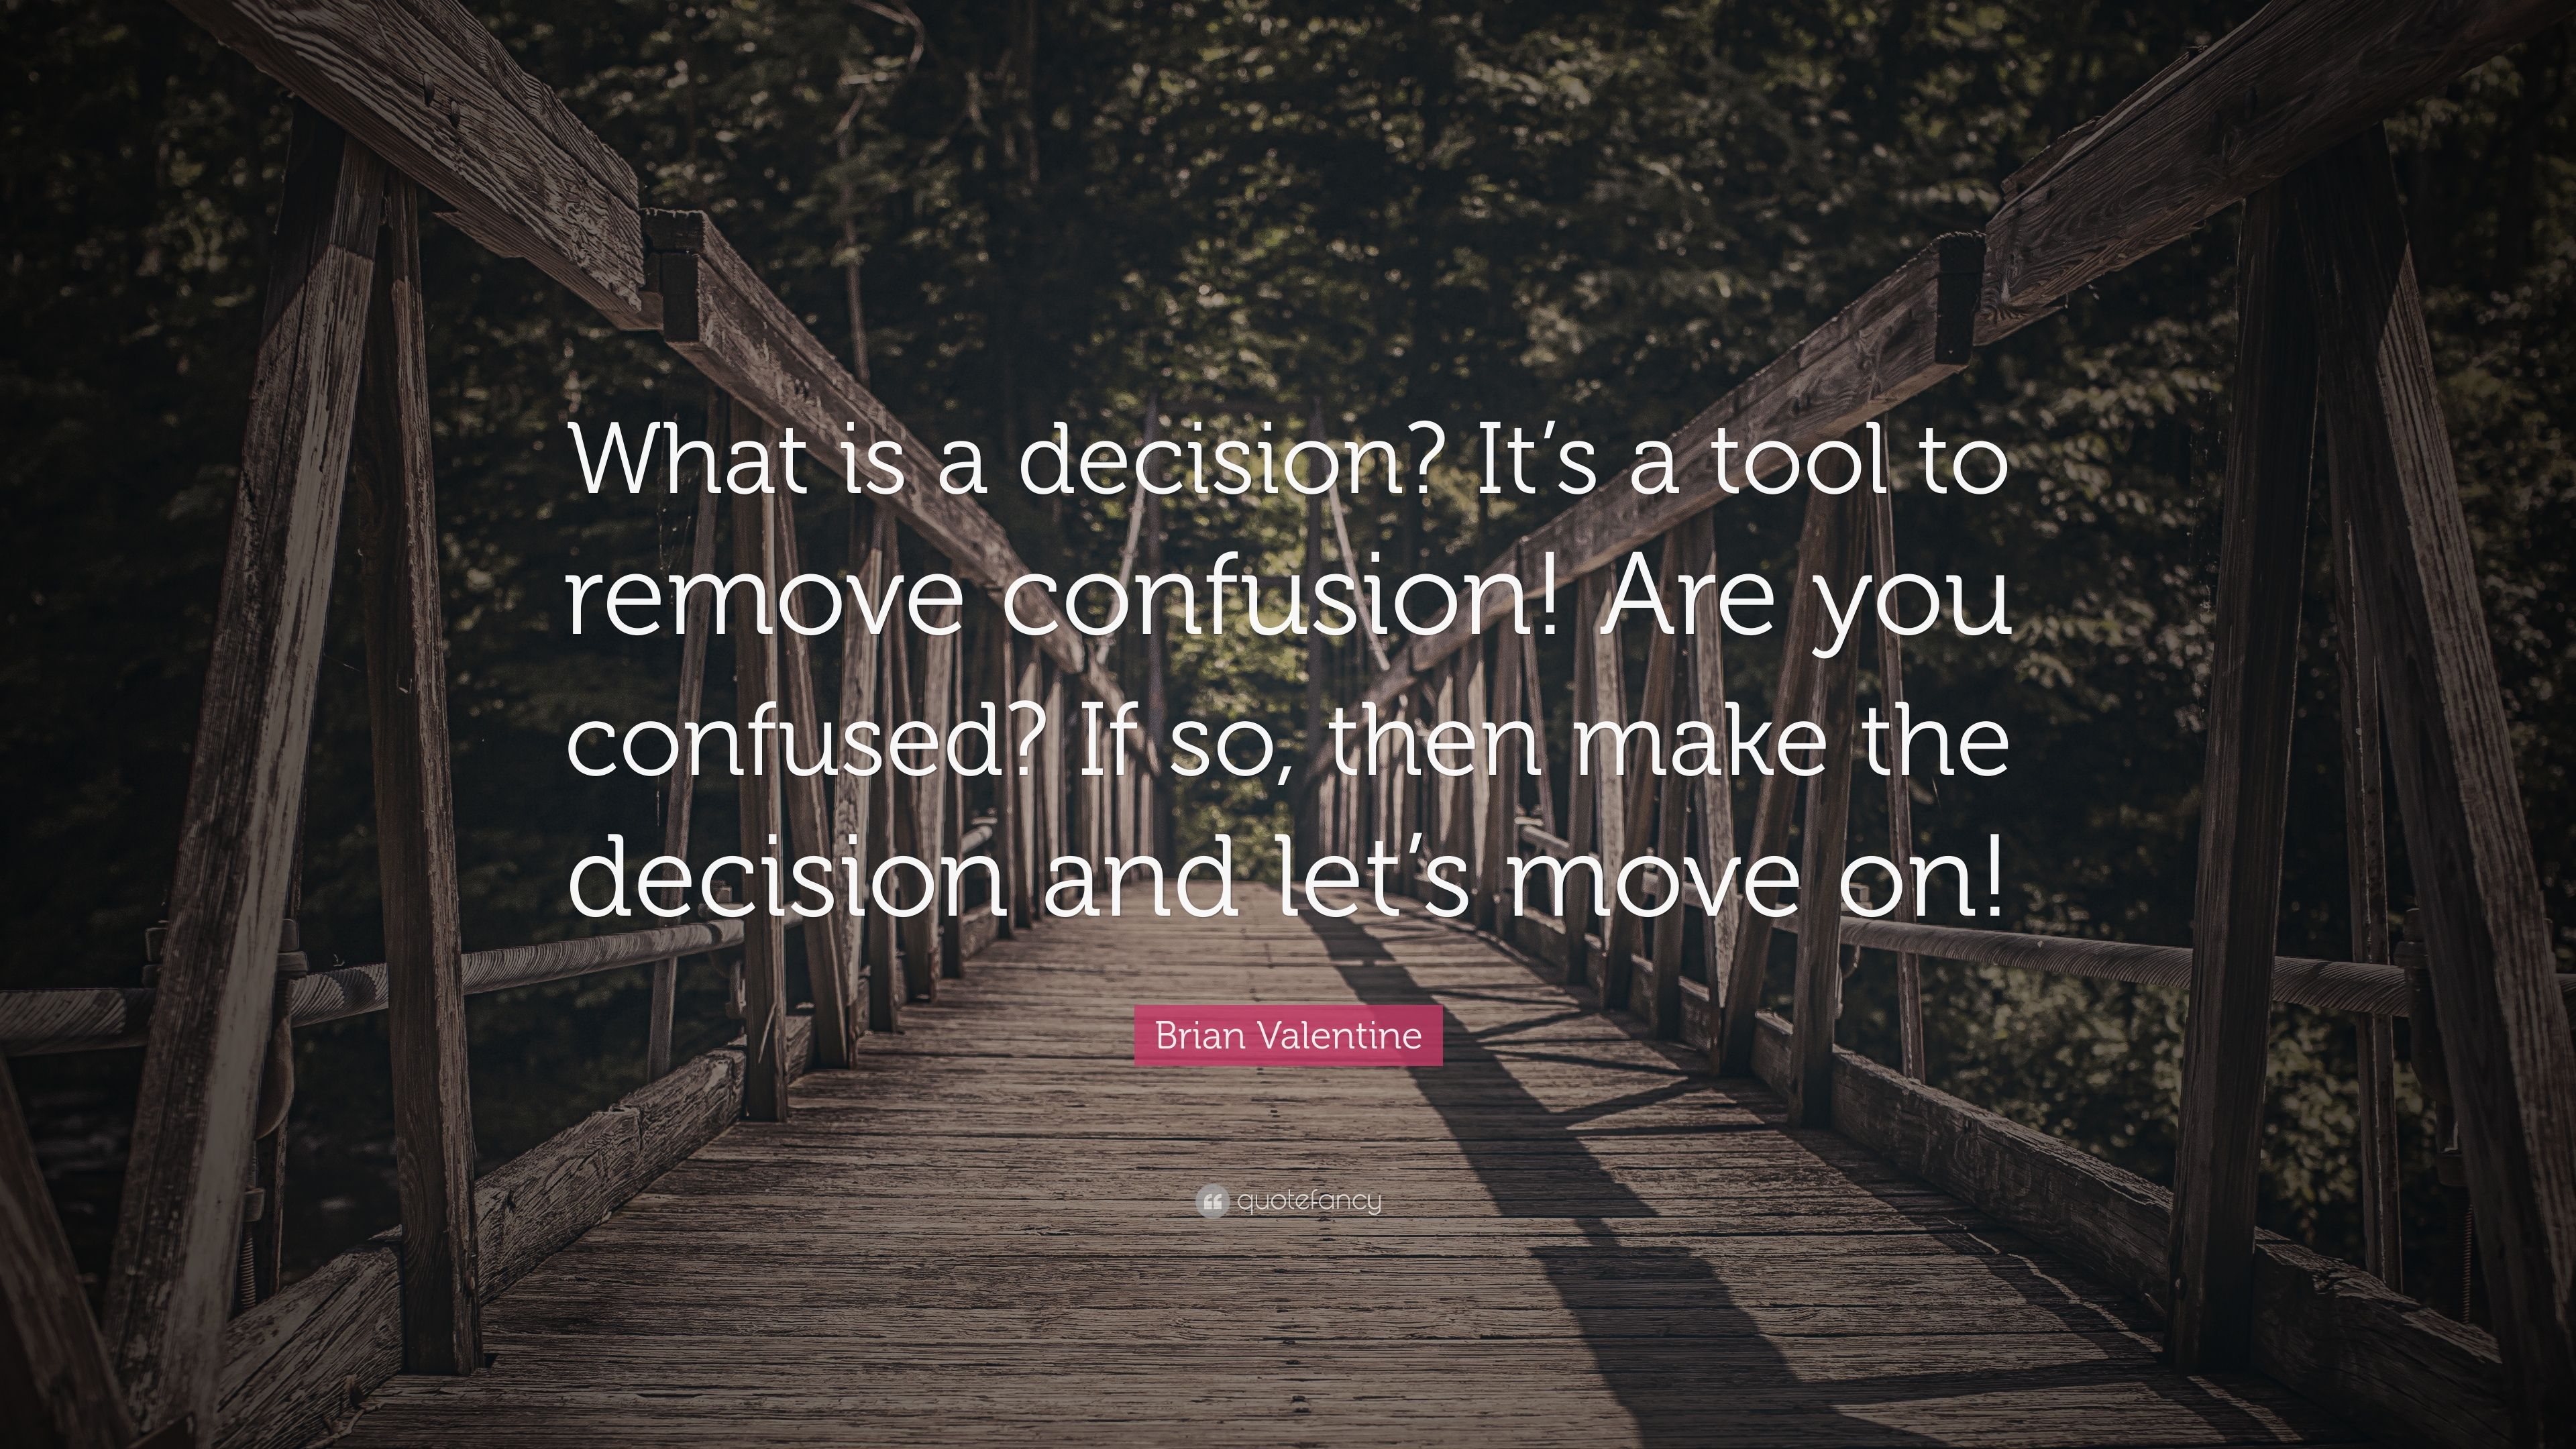 Brian Valentine Quote: “What is a decision? It's a tool to remove